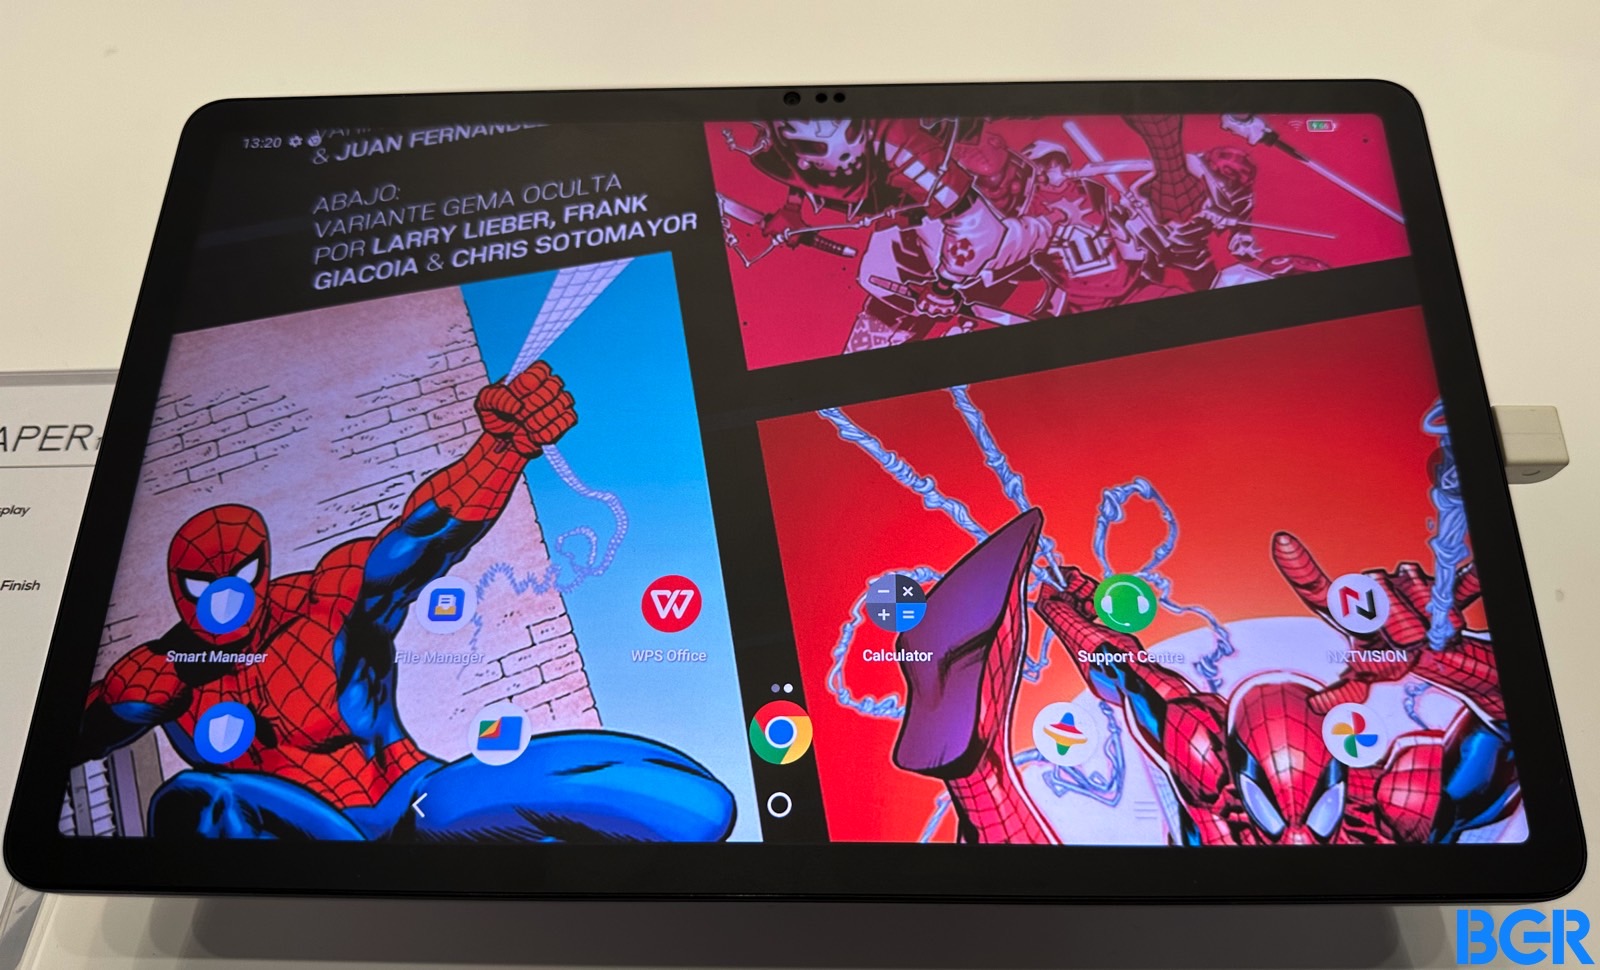 I’d buy a TCL NXTPAPER 11 tablet just for the amazing screen